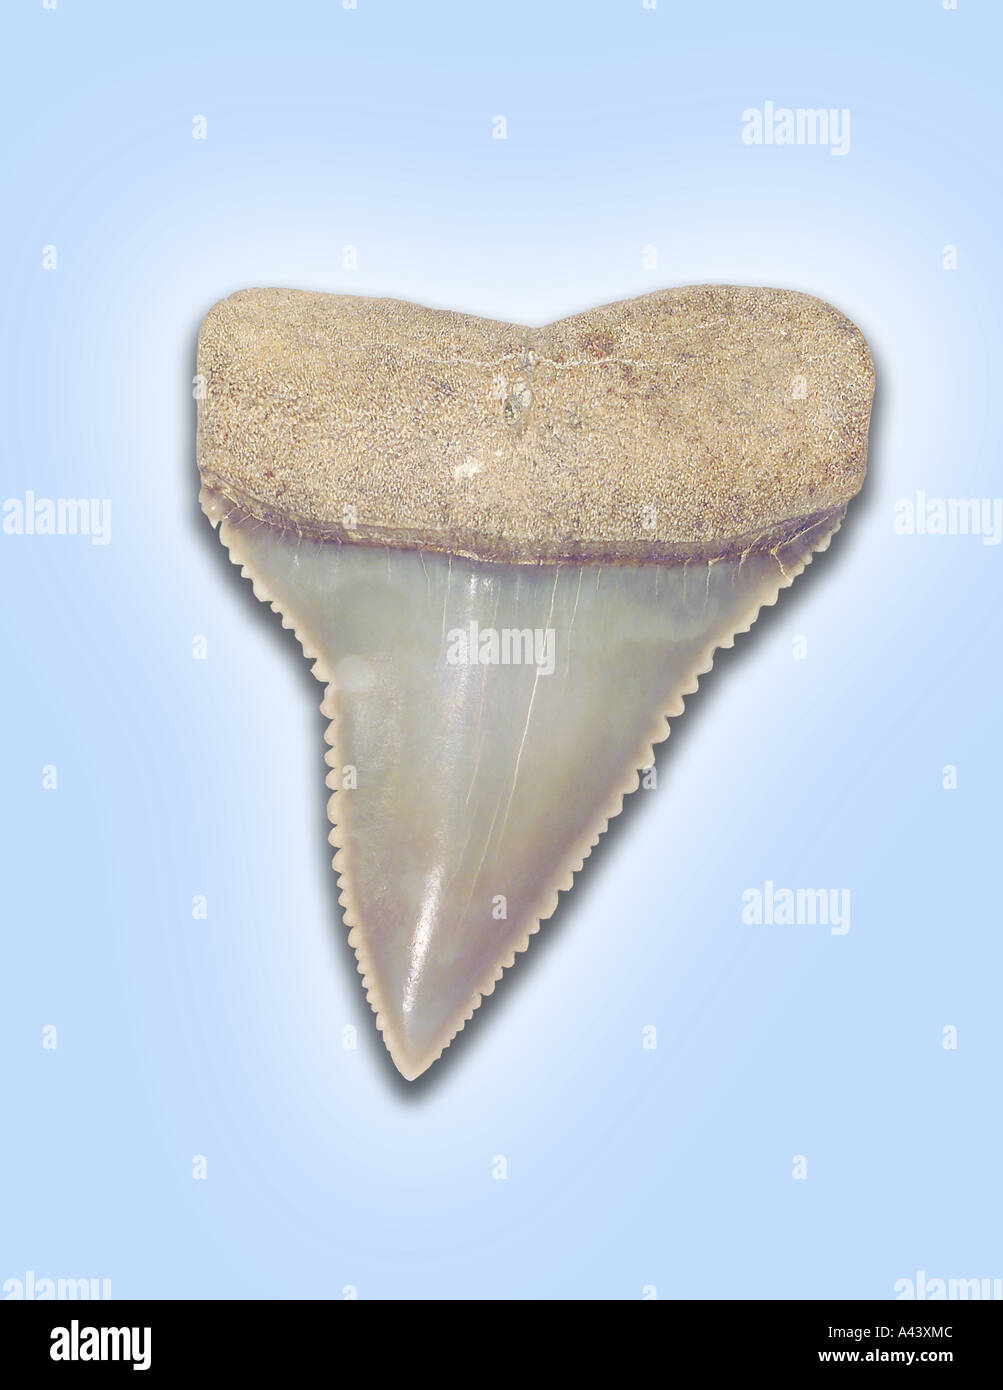 Fossil Peruvian Great White Shark Tooth Stock Photo - Alamy